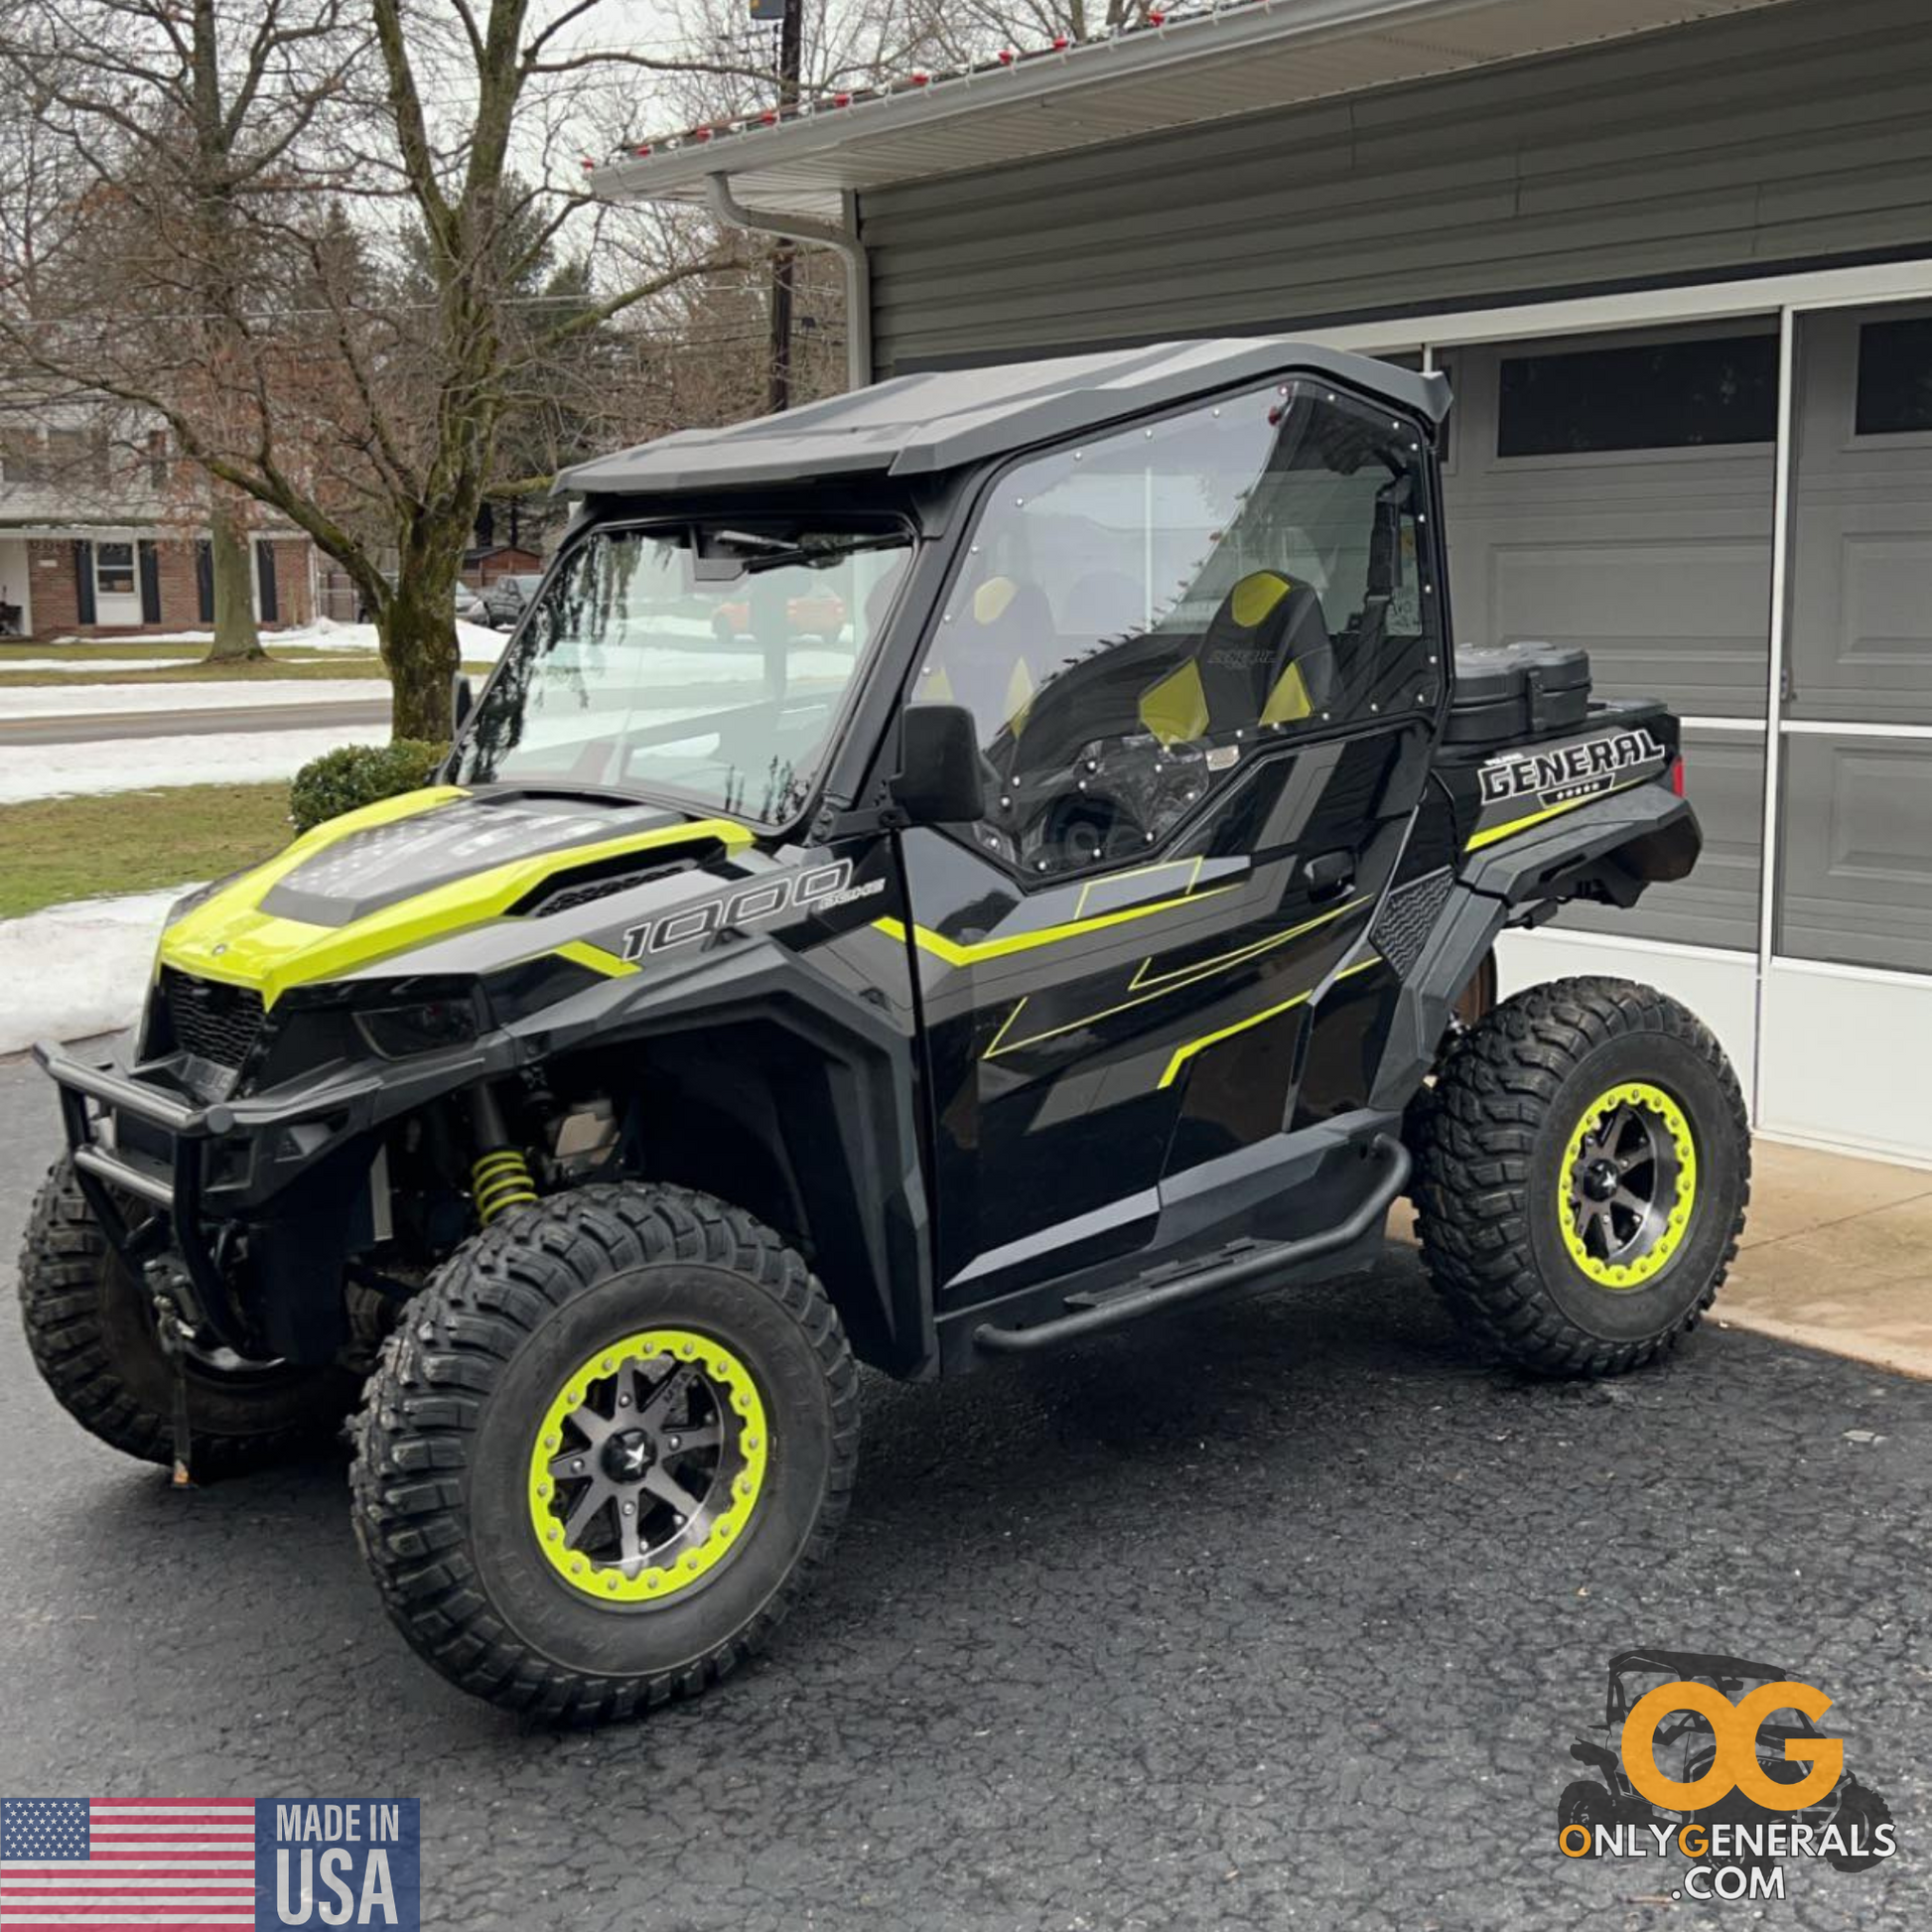 Customer submitted photo with a Polaris General showing off their SideskinsLITE hard upper doors from OnlyGenerals